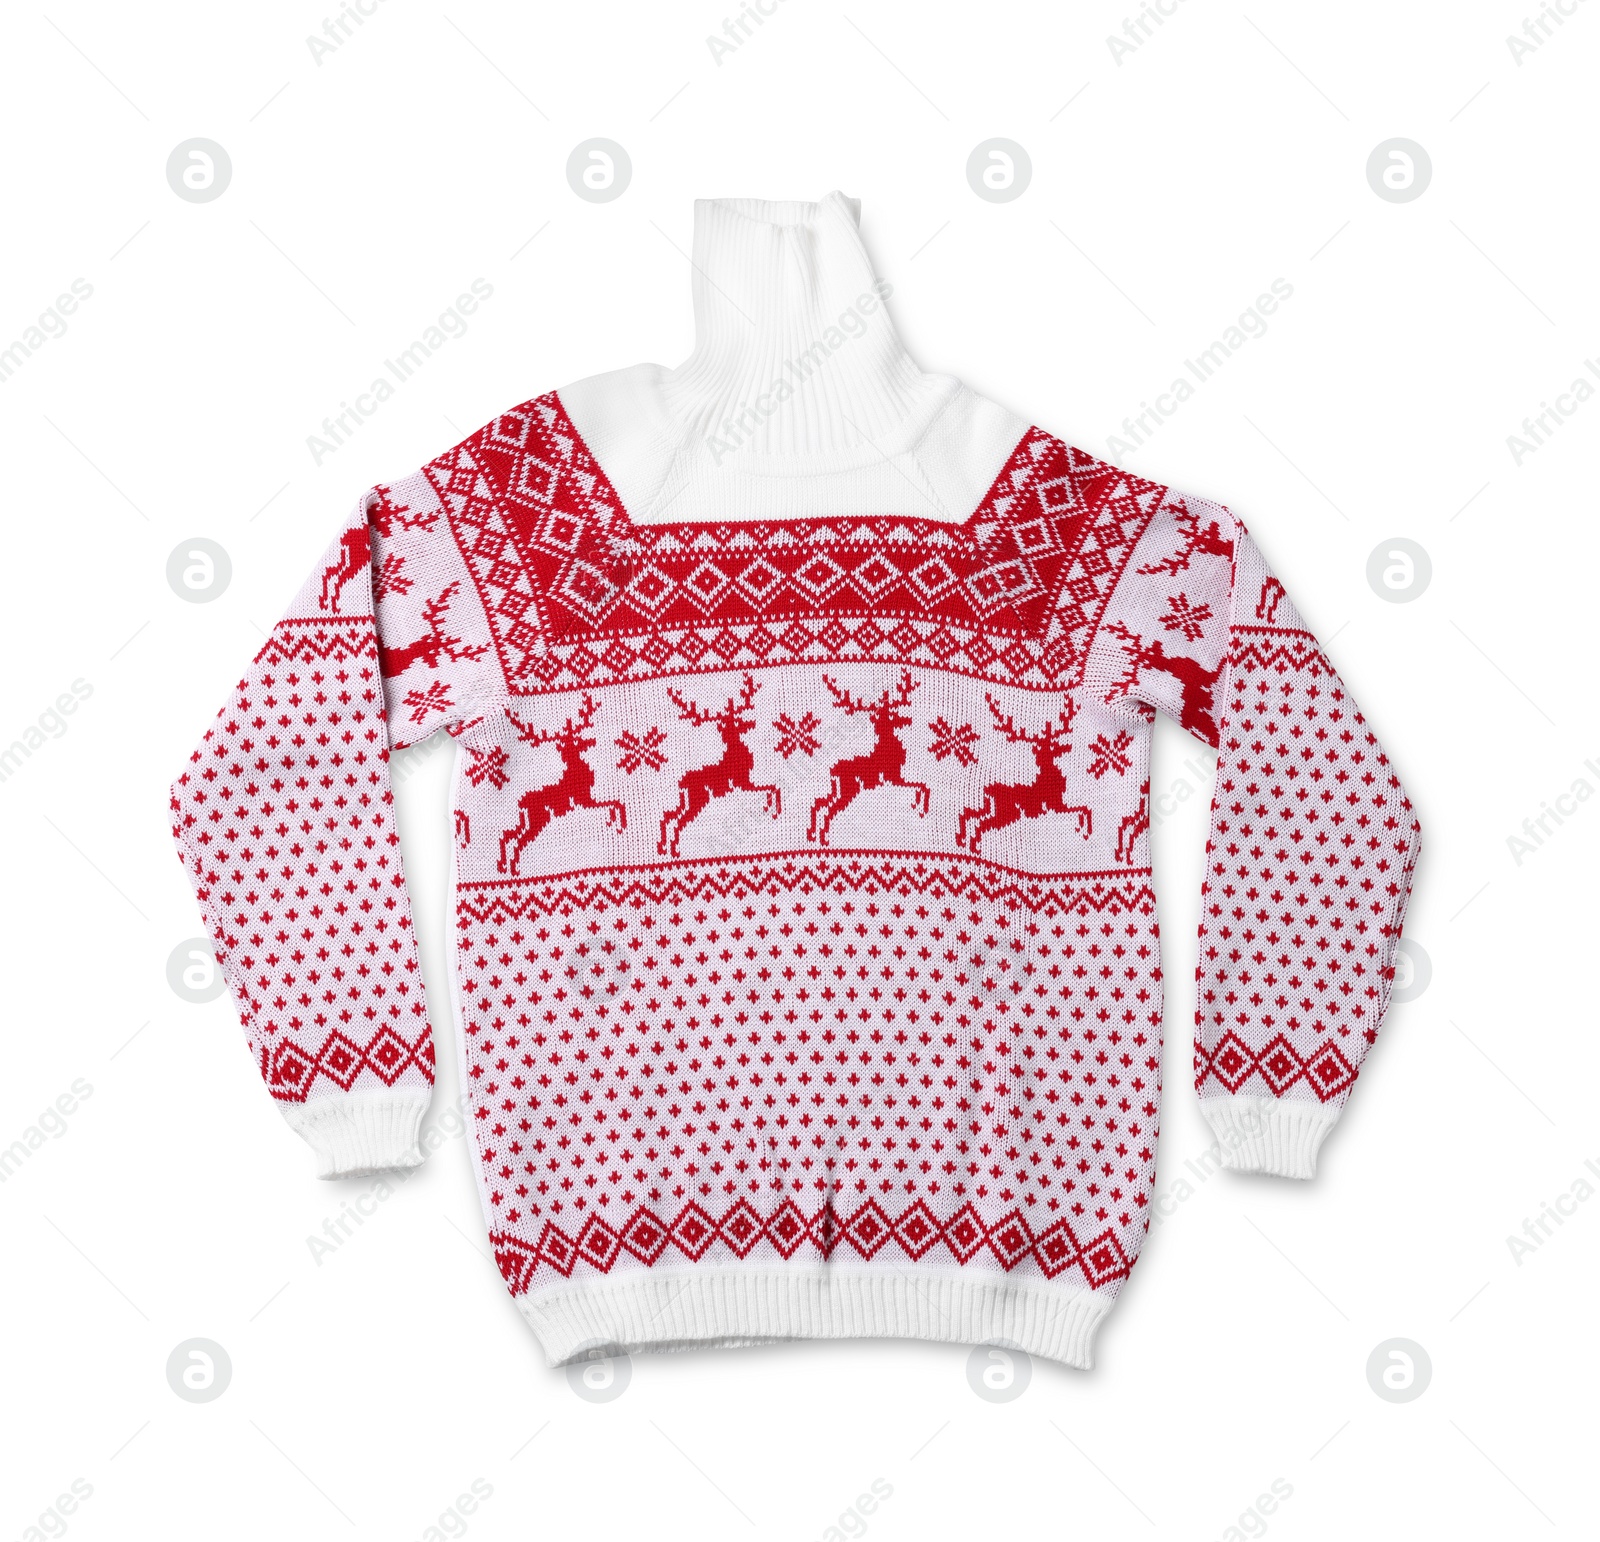 Photo of Christmas sweater with reindeer ornament isolated on white, top view